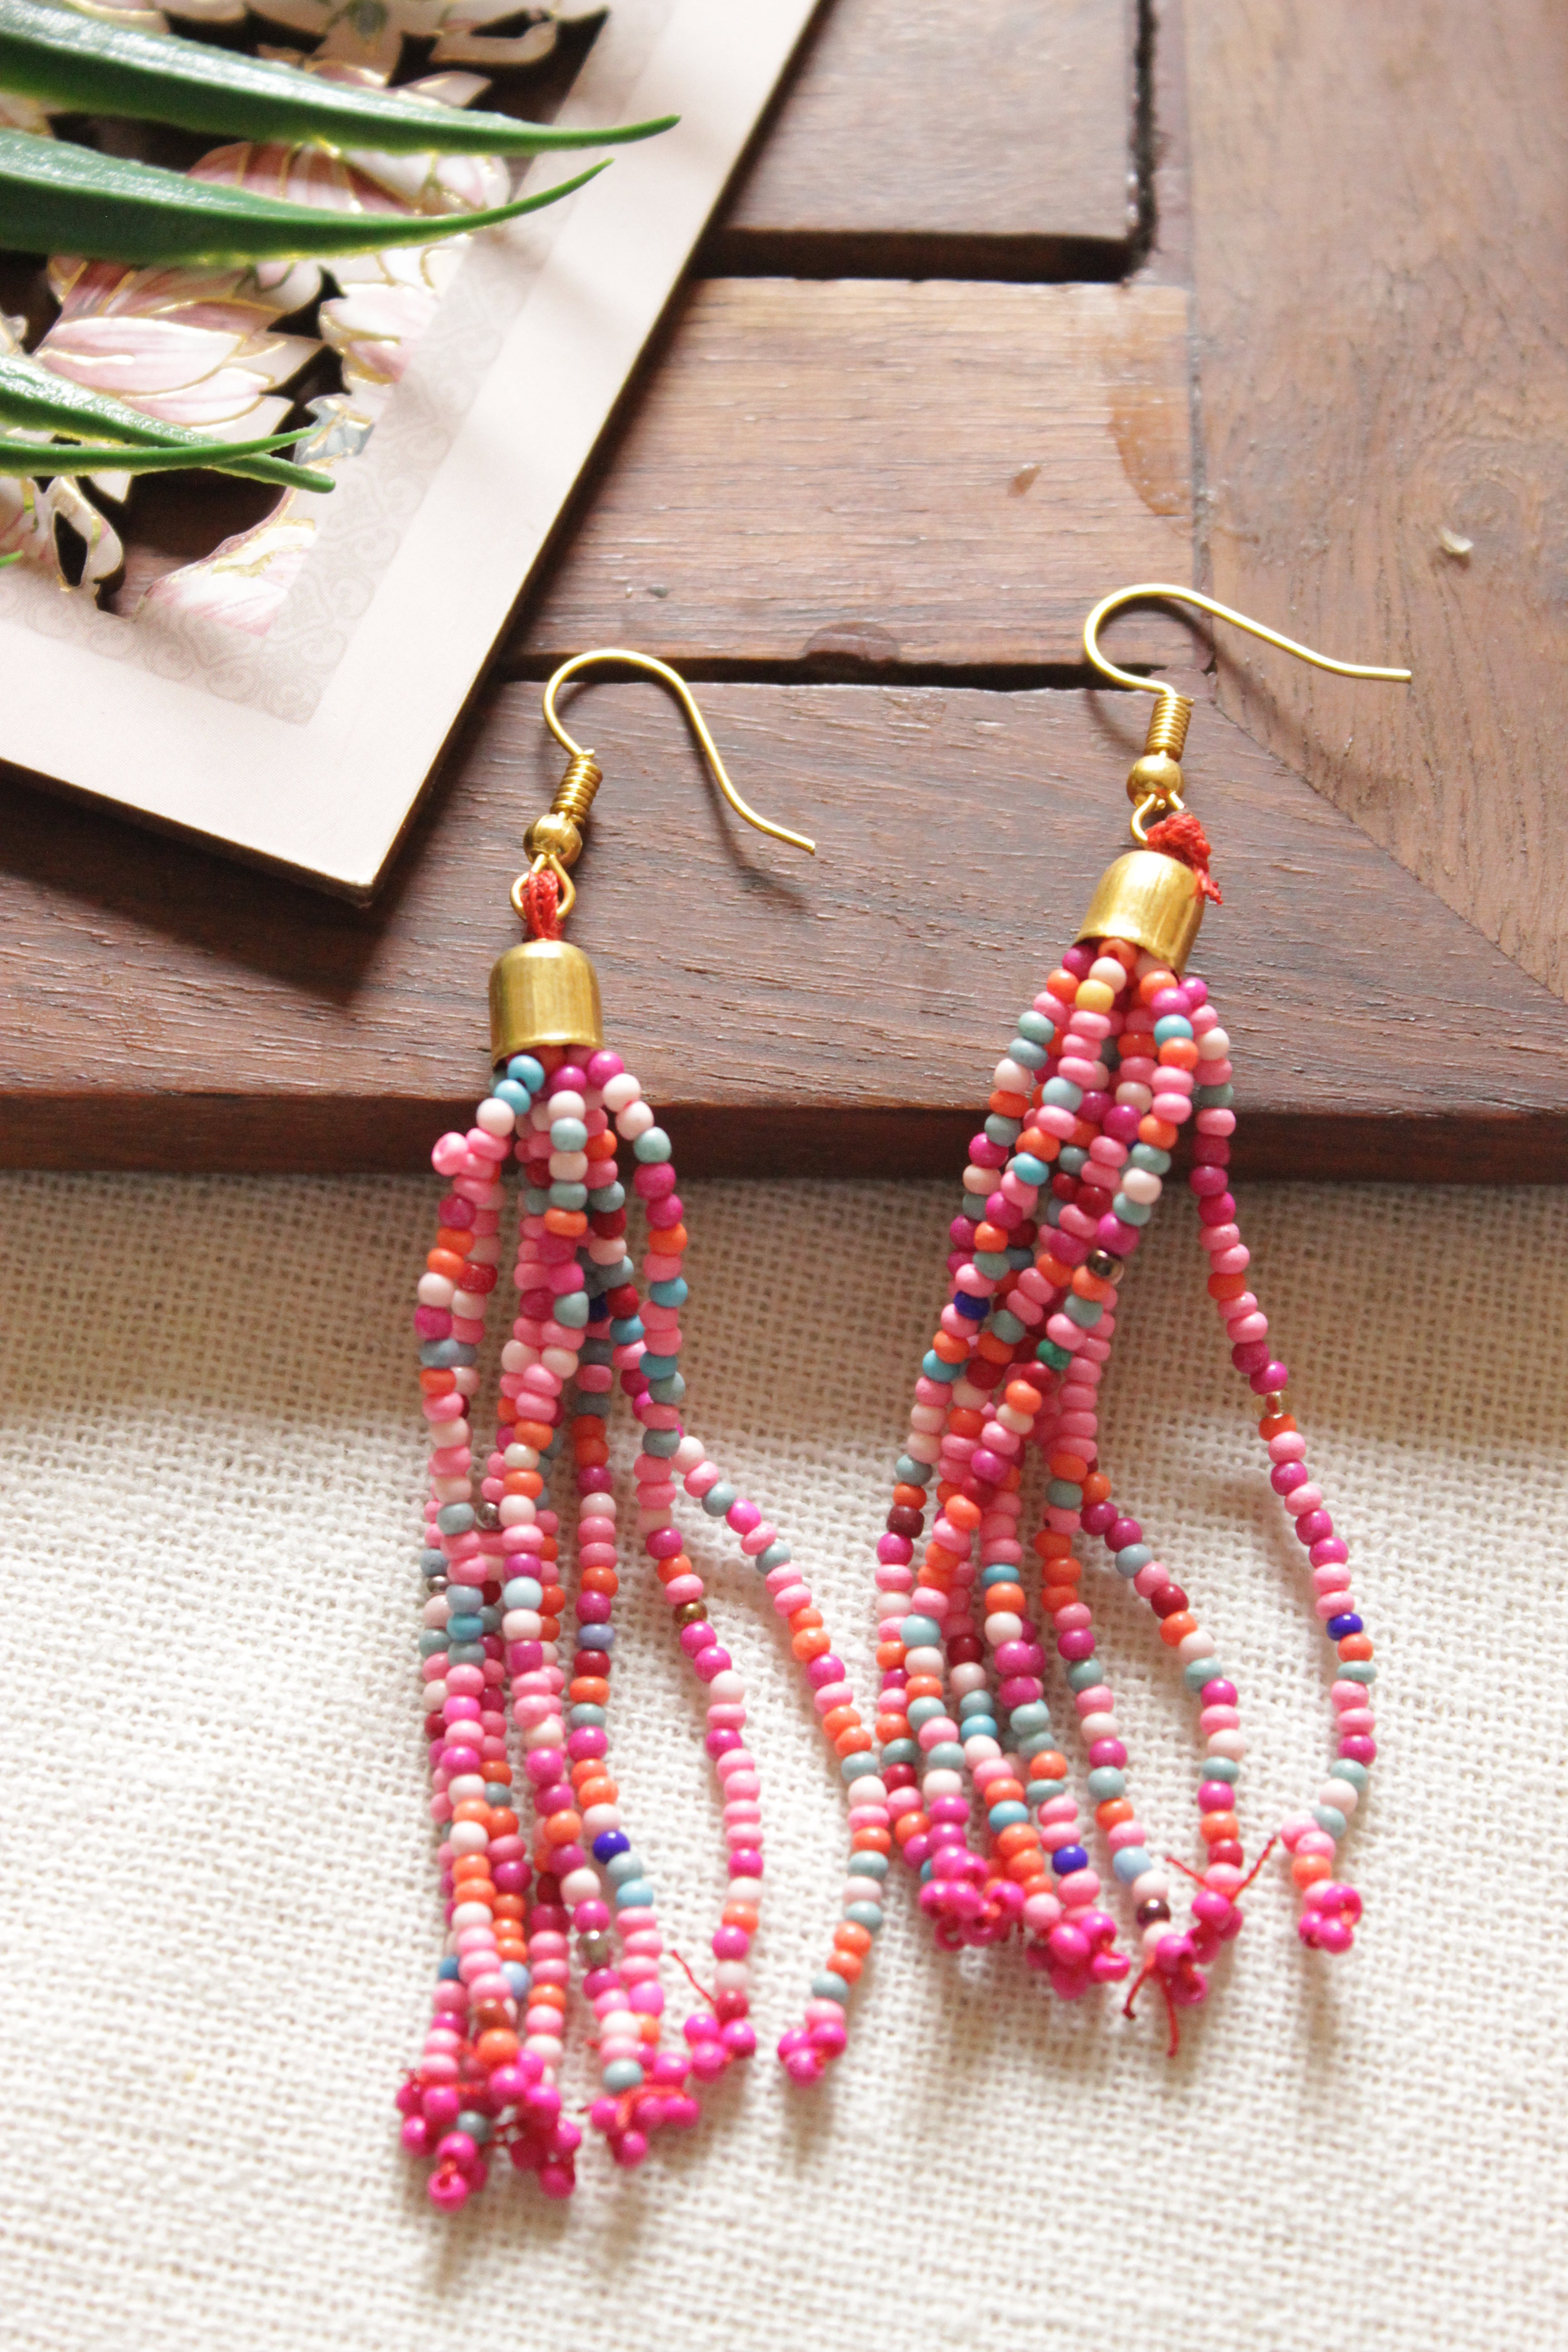 Fuchsia and Multi-Color Seed Beads Handmade Beaded Necklace